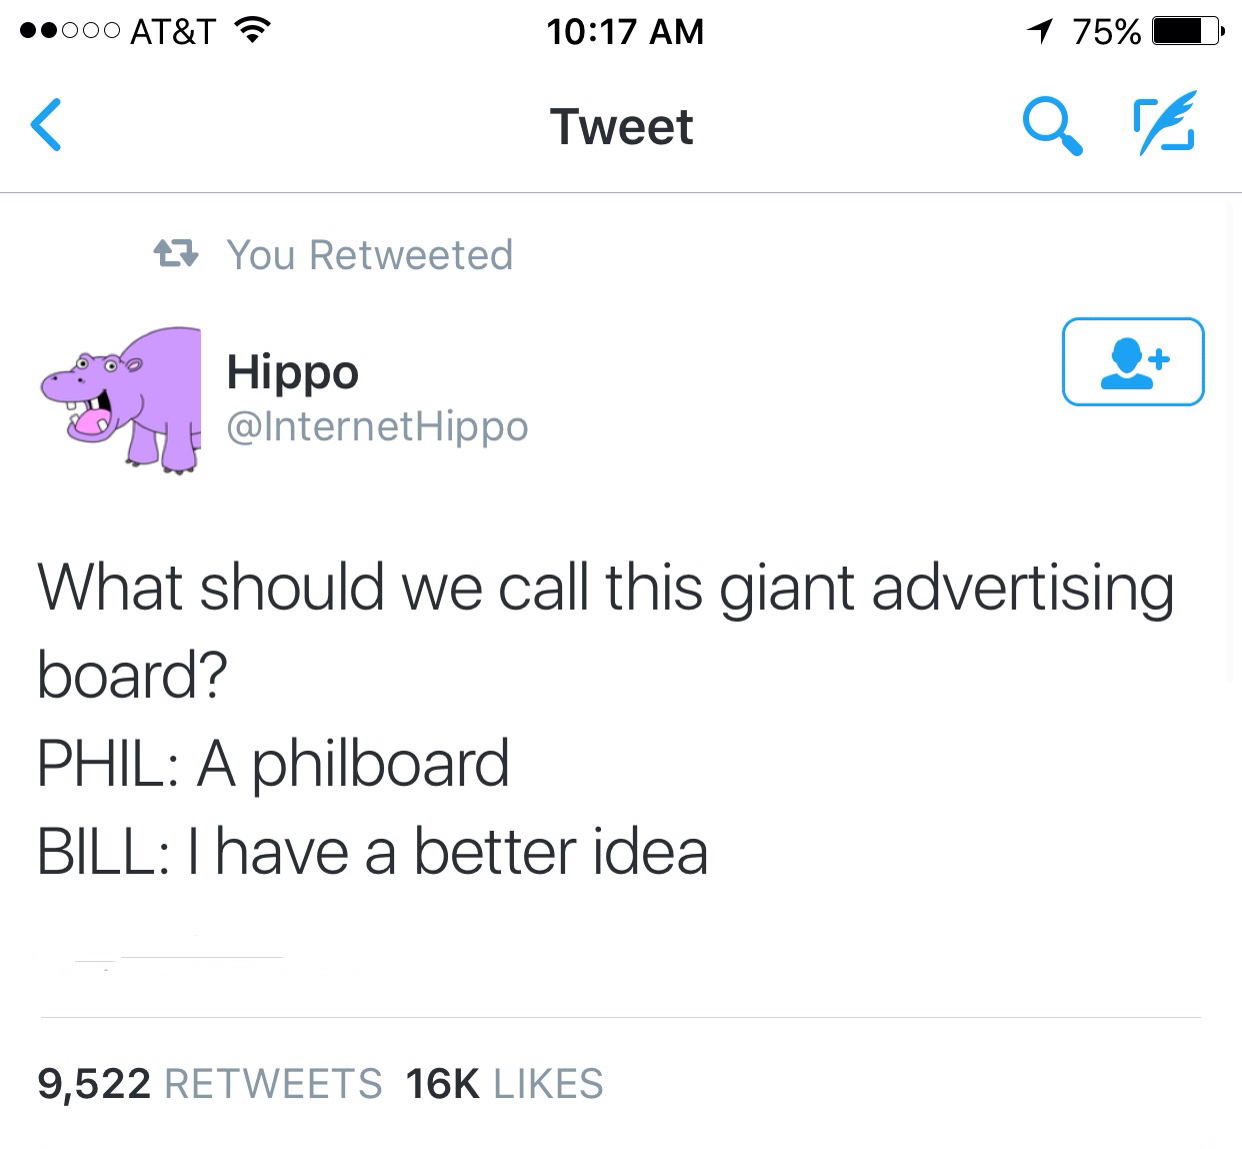 memes - angle - .000 At&T 1 75% Tweet Qa 27 You Retweeted Hippo Hippo What should we call this giant advertising board? Phil A philboard Bill I have a better idea 9,522 16K